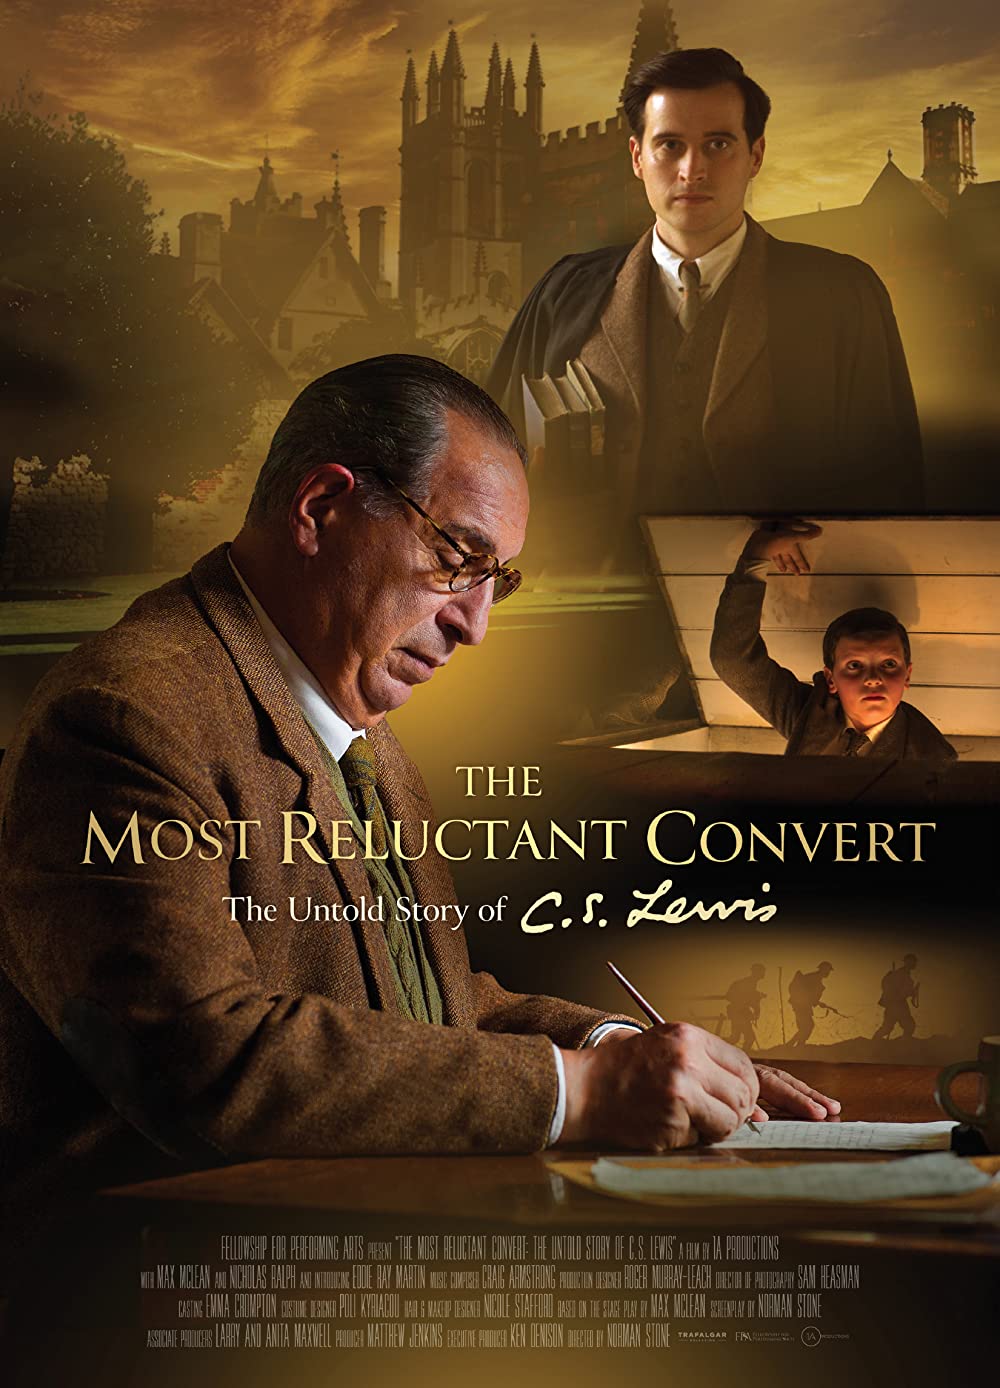 Poster Phim Câu Chuyện Chưa Kể Của C.S. Lewis (The Most Reluctant Convert: The Untold Story of C.S. Lewis)